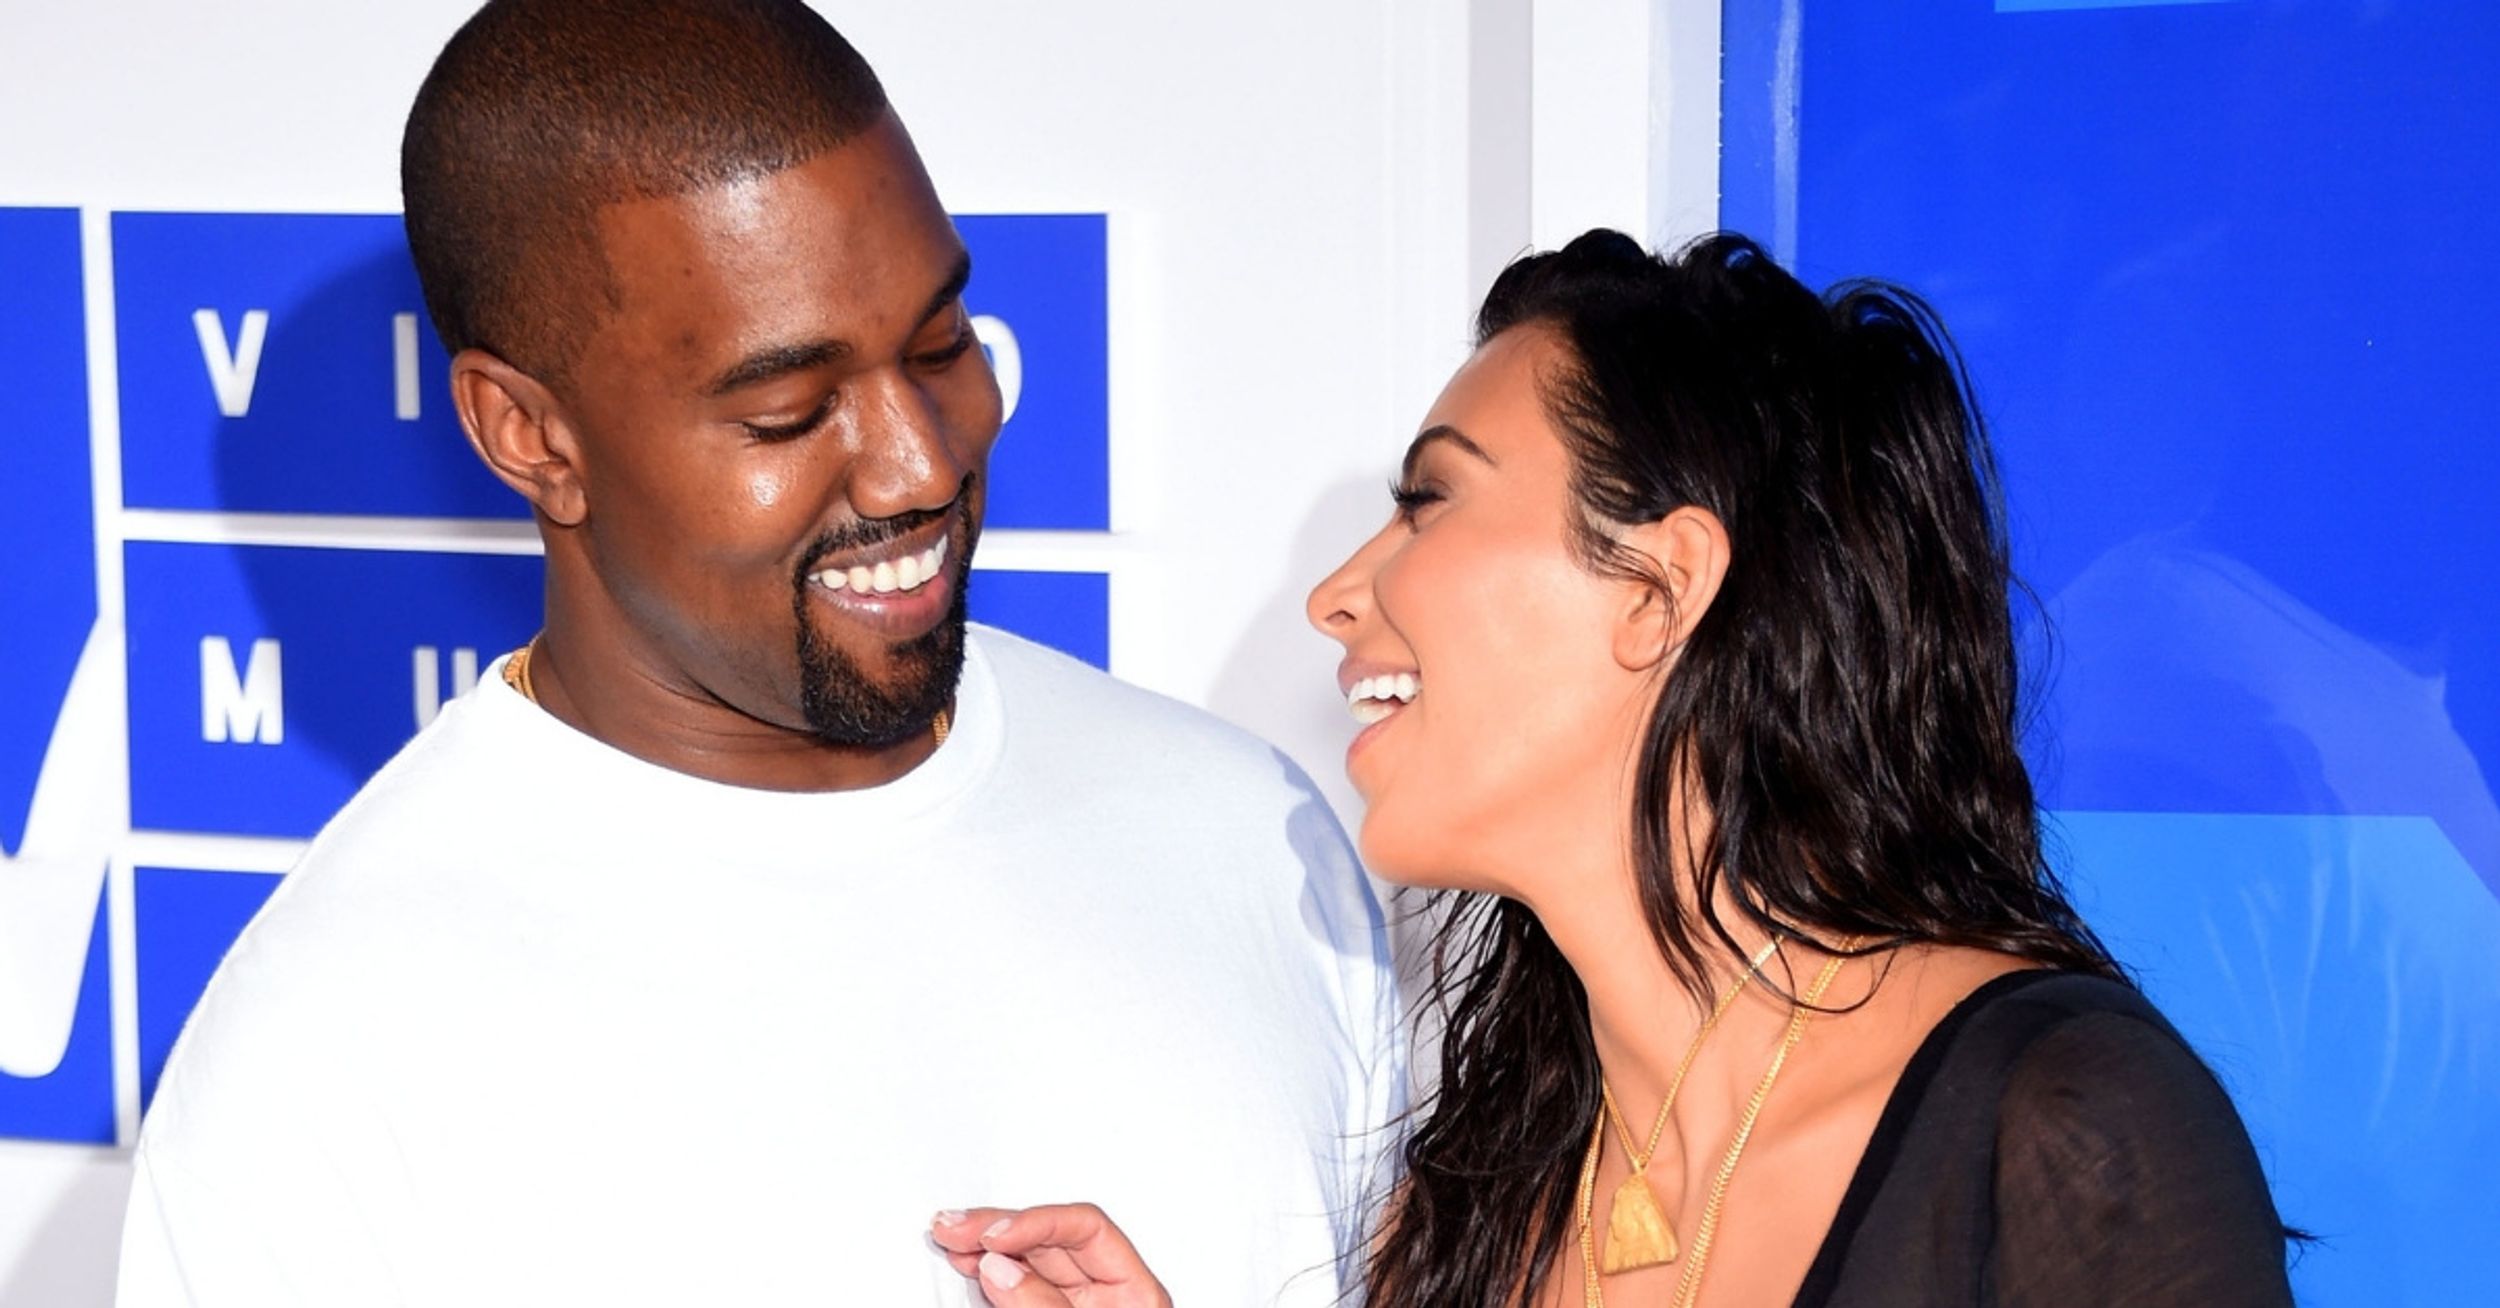 Kim Kardashian Left A Suggestive Comment On Kanye's Instagram That Certainly Raised Some Eyebrows 😳